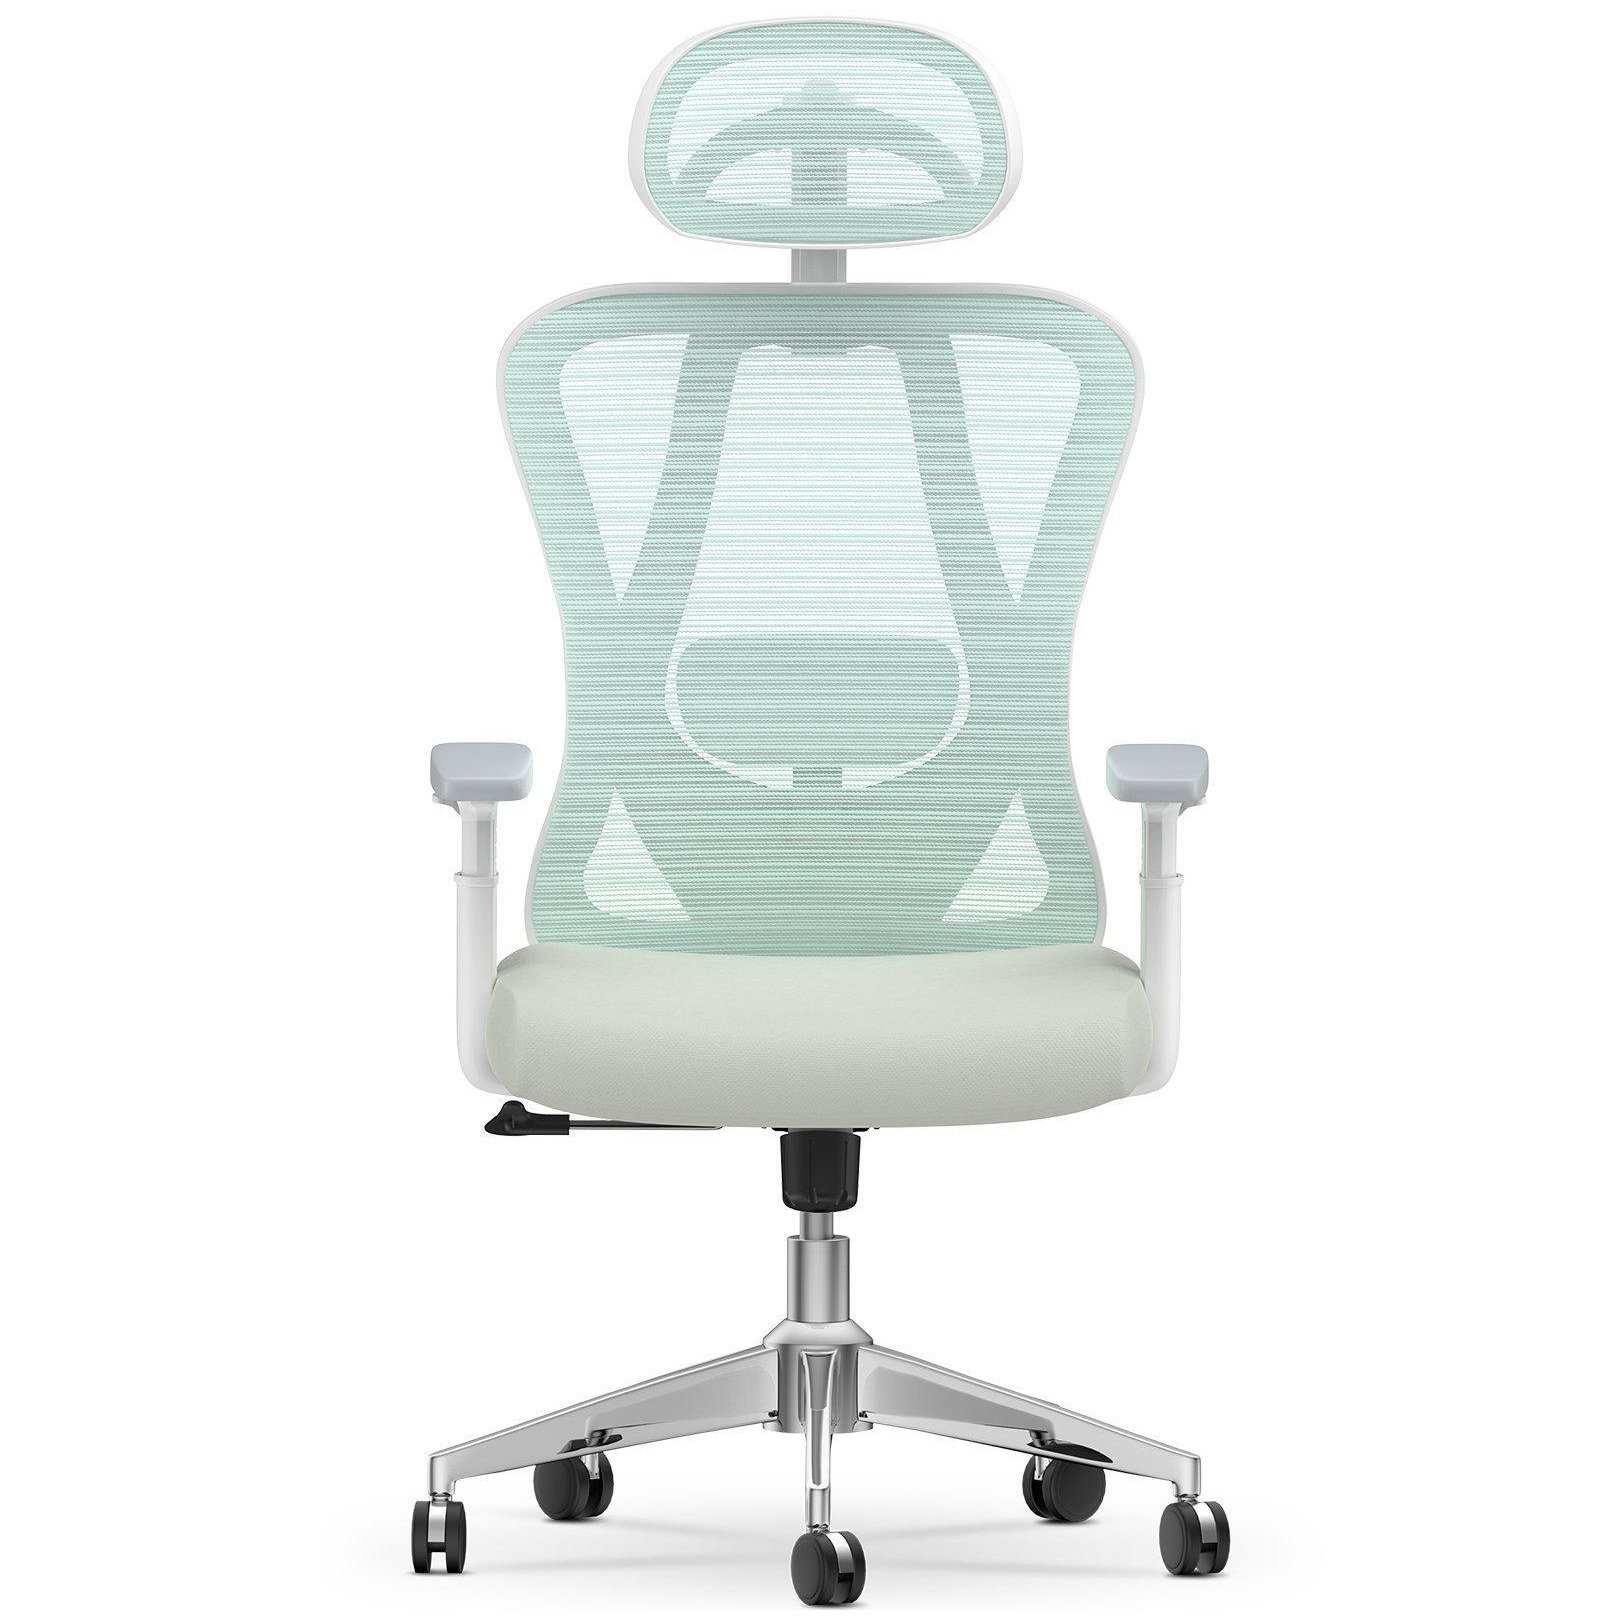 Ergonomic Mesh Office Chair High Back  with Adjustable Headrest, Armrests, Lumbar Support - image 1